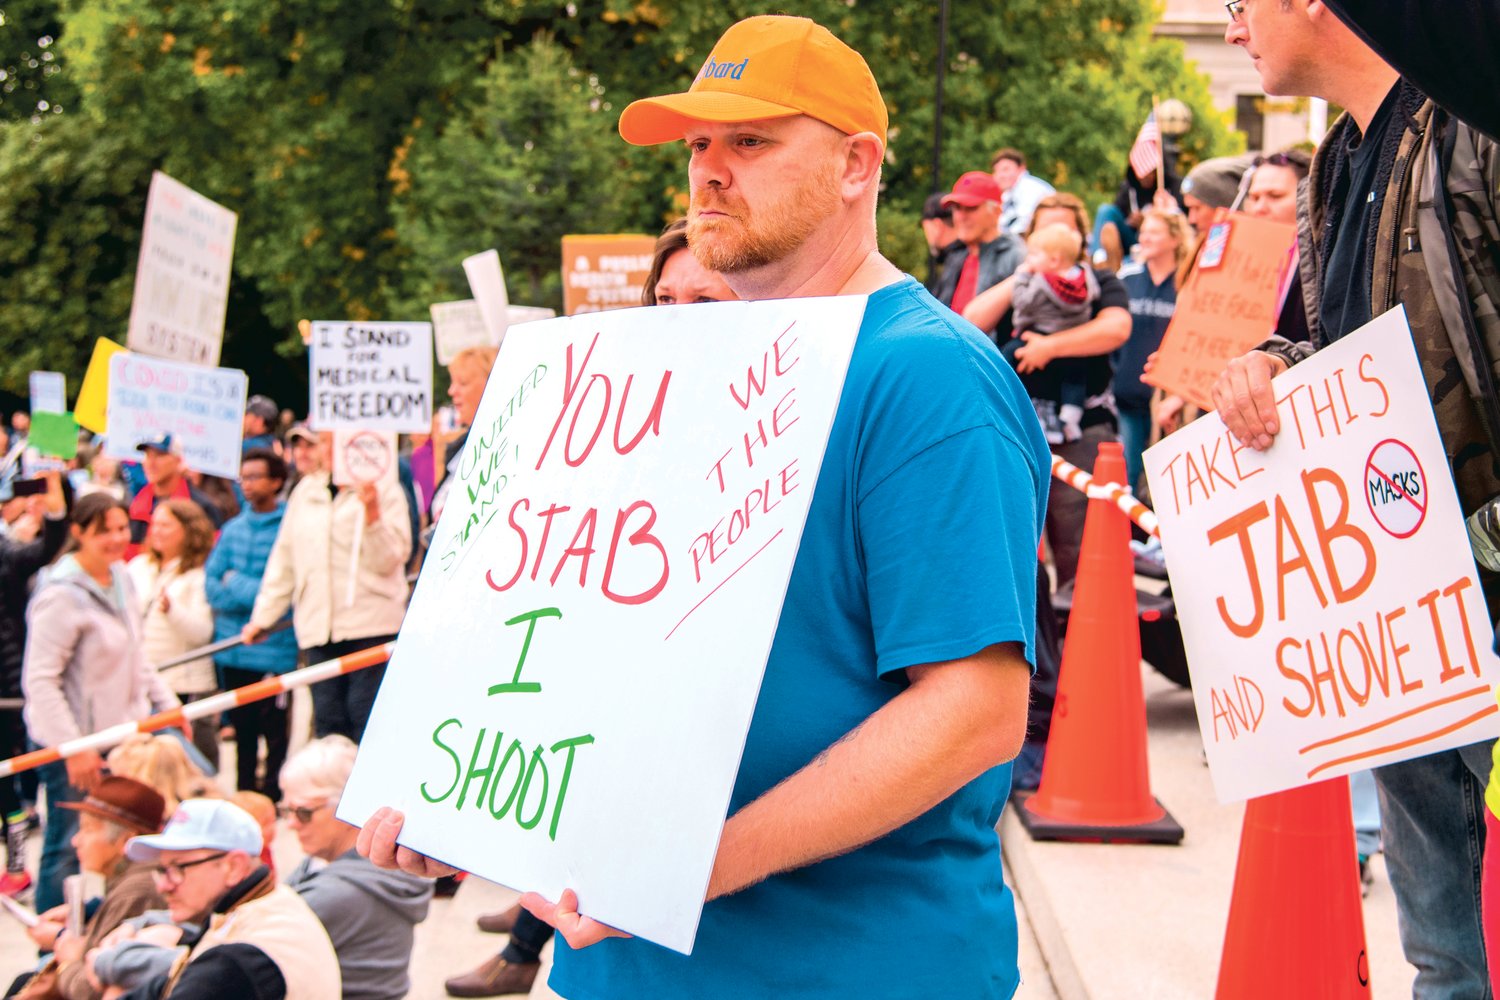 Stephen Hubbard holds a sign that reads, “You stab, I shoot,” along with the phrases, “United We Stand,” and “We The People,” during a “Medical Freedom Rally” outside the Washington State Capitol Building Sunday afternoon in Olympia.